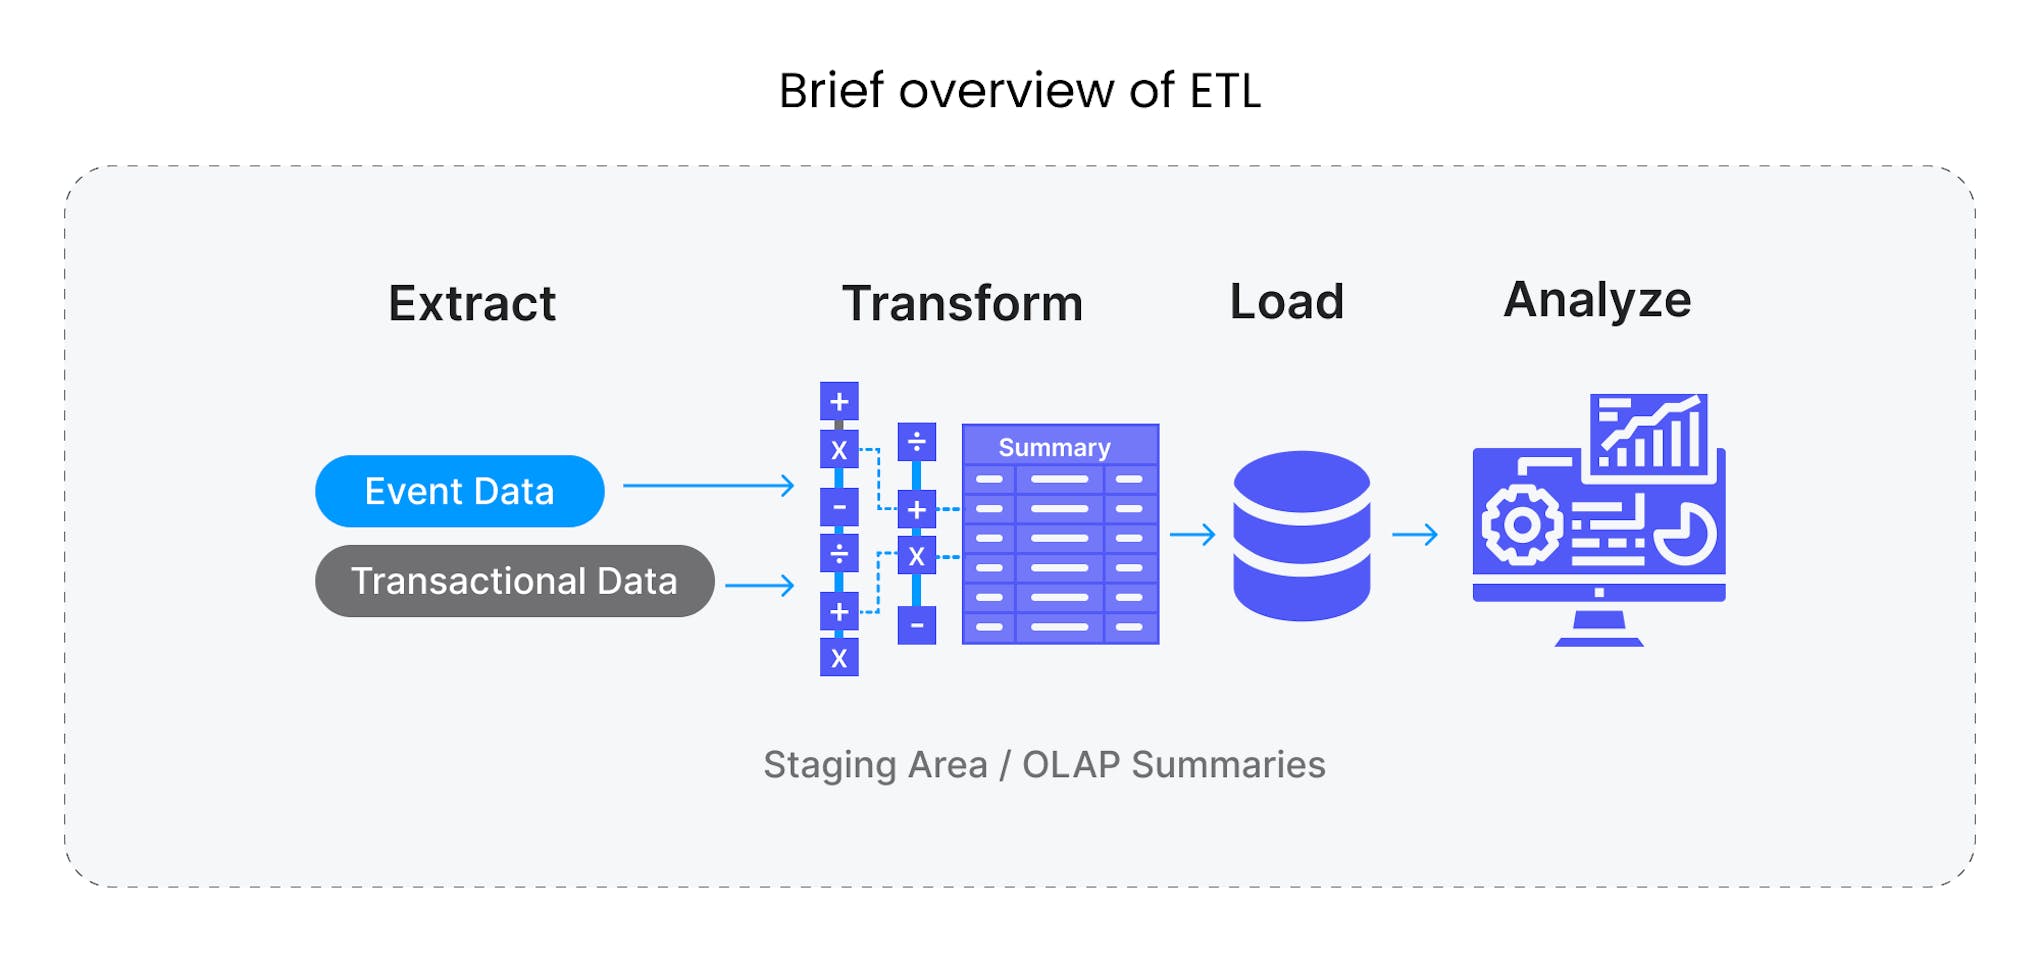 A brief overview of ETL